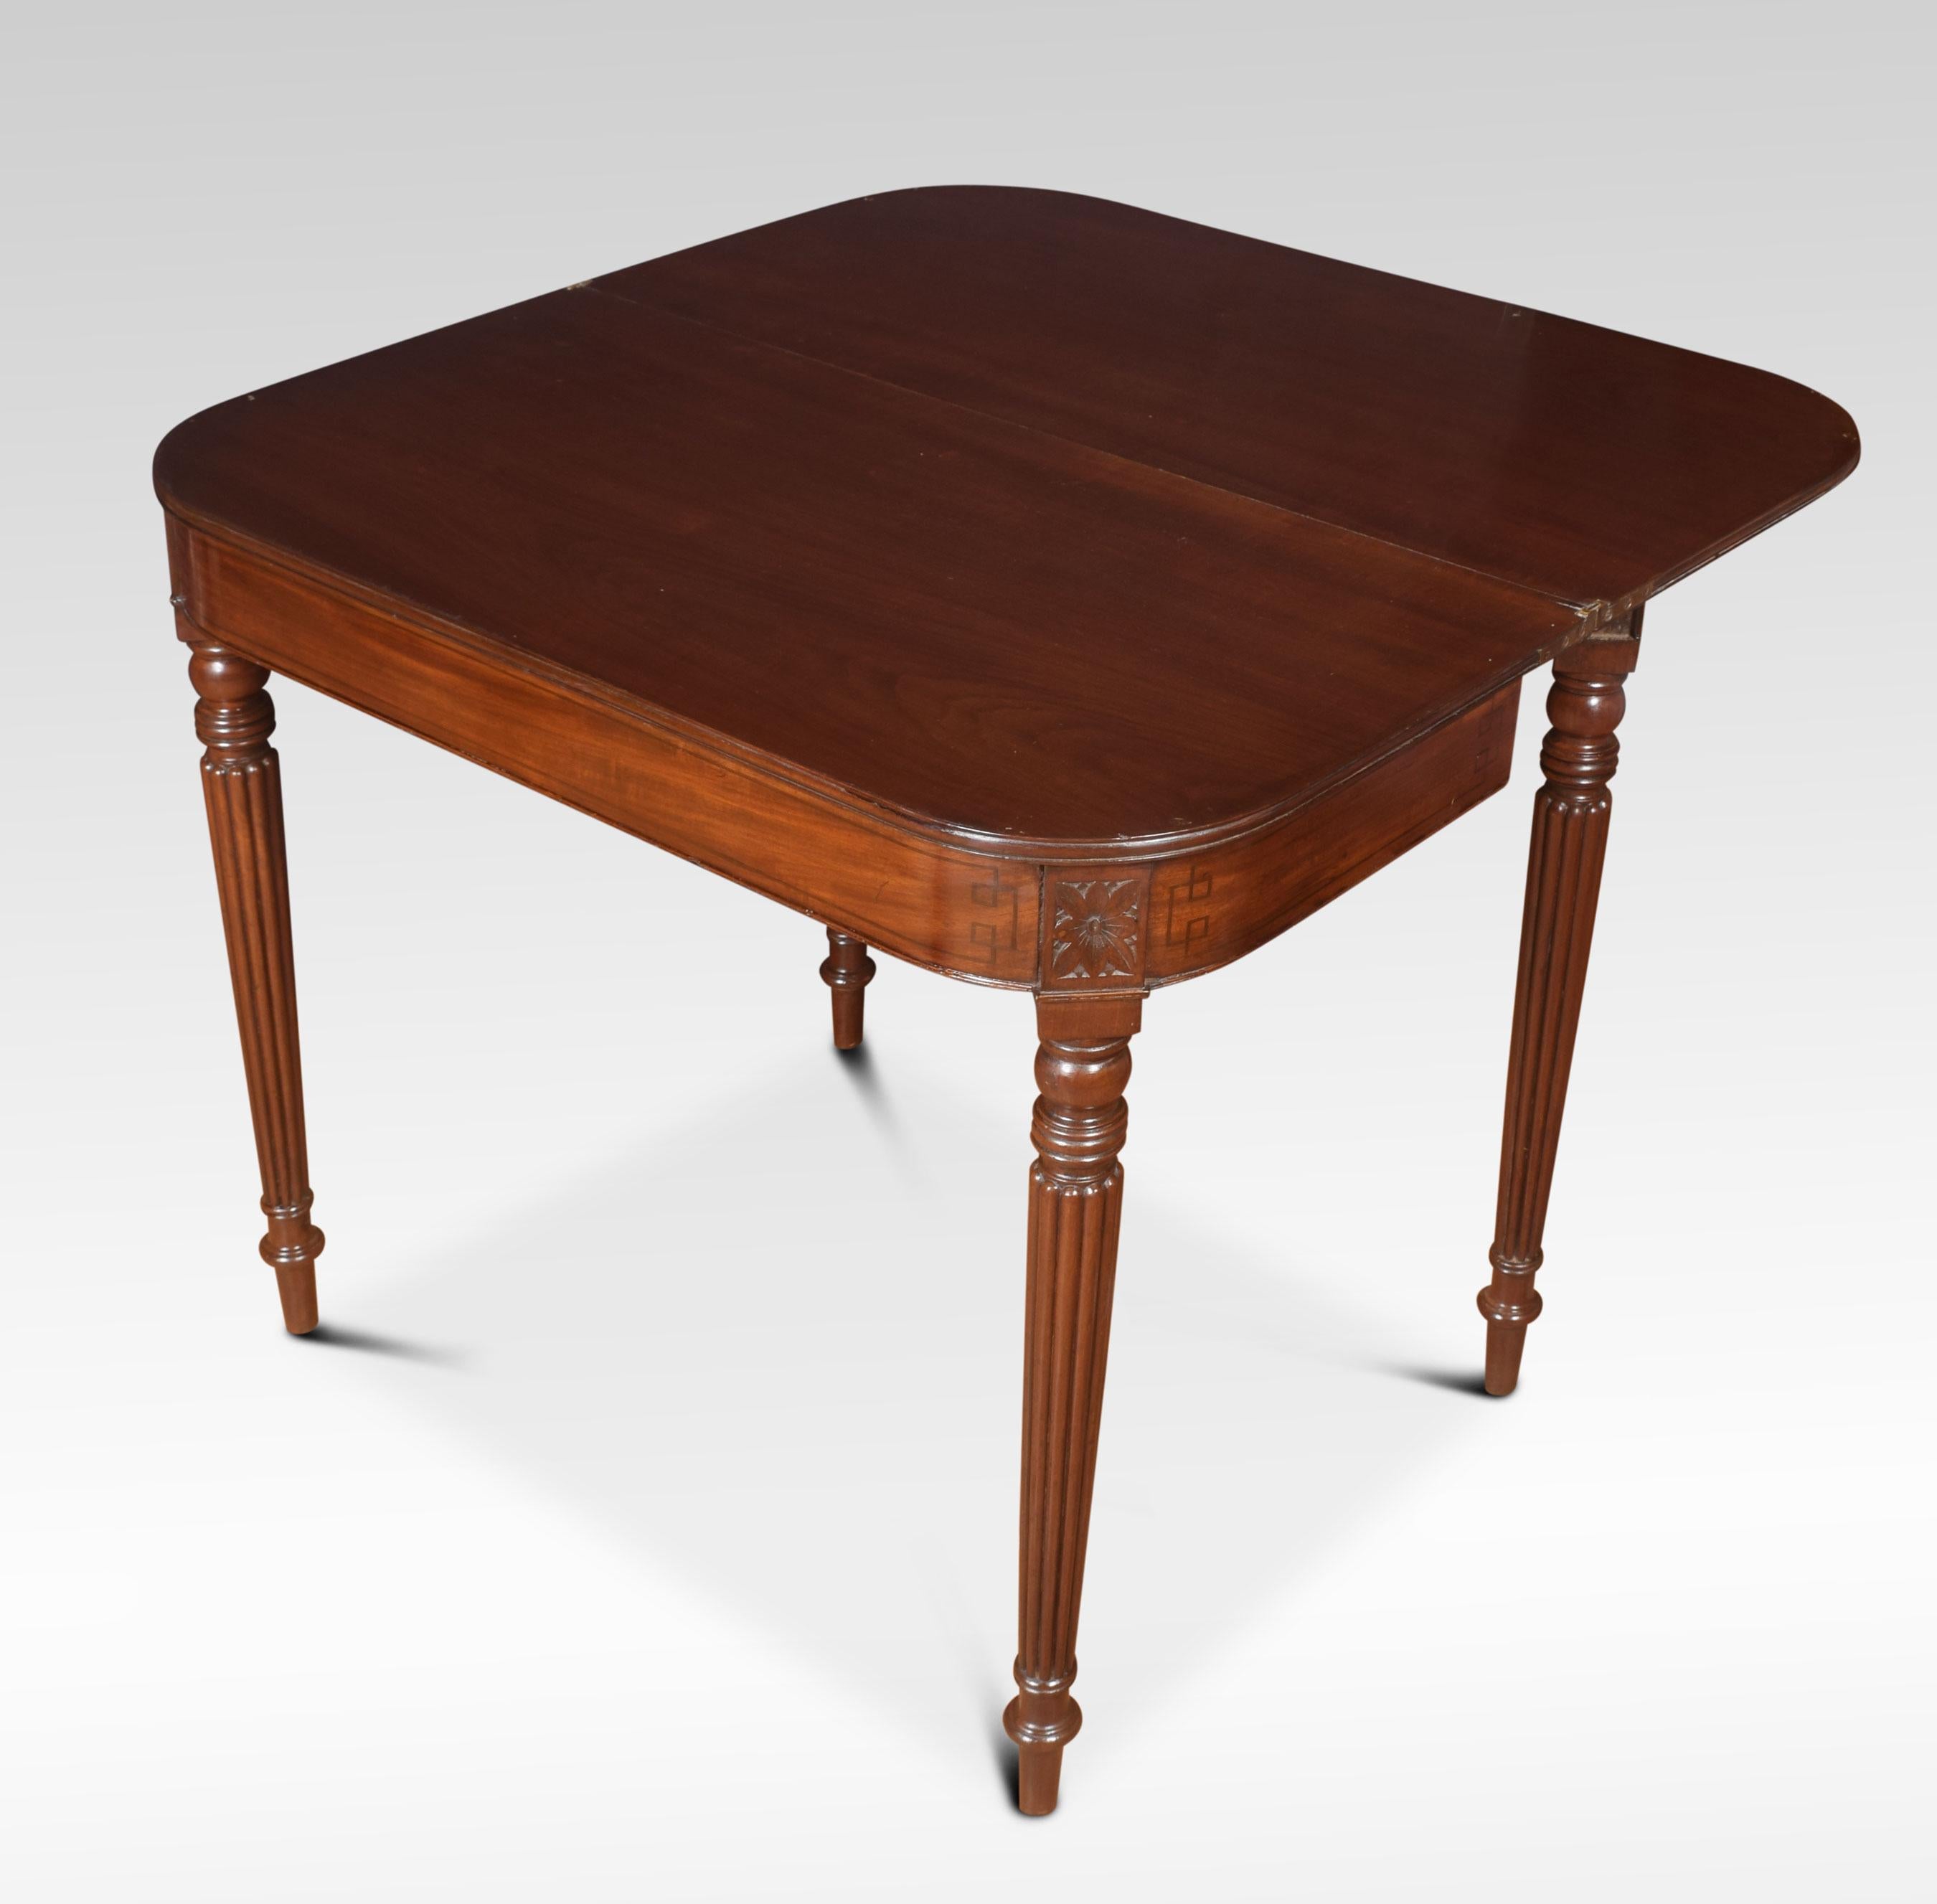 Regency mahogany tea table, the folding and swivel top, above ebony line inlaid frieze. Raised up on four reeded-turned tapering legs.
Dimensions:
Height 30 inches
Width 36 inches
Depth 17.5 inches.